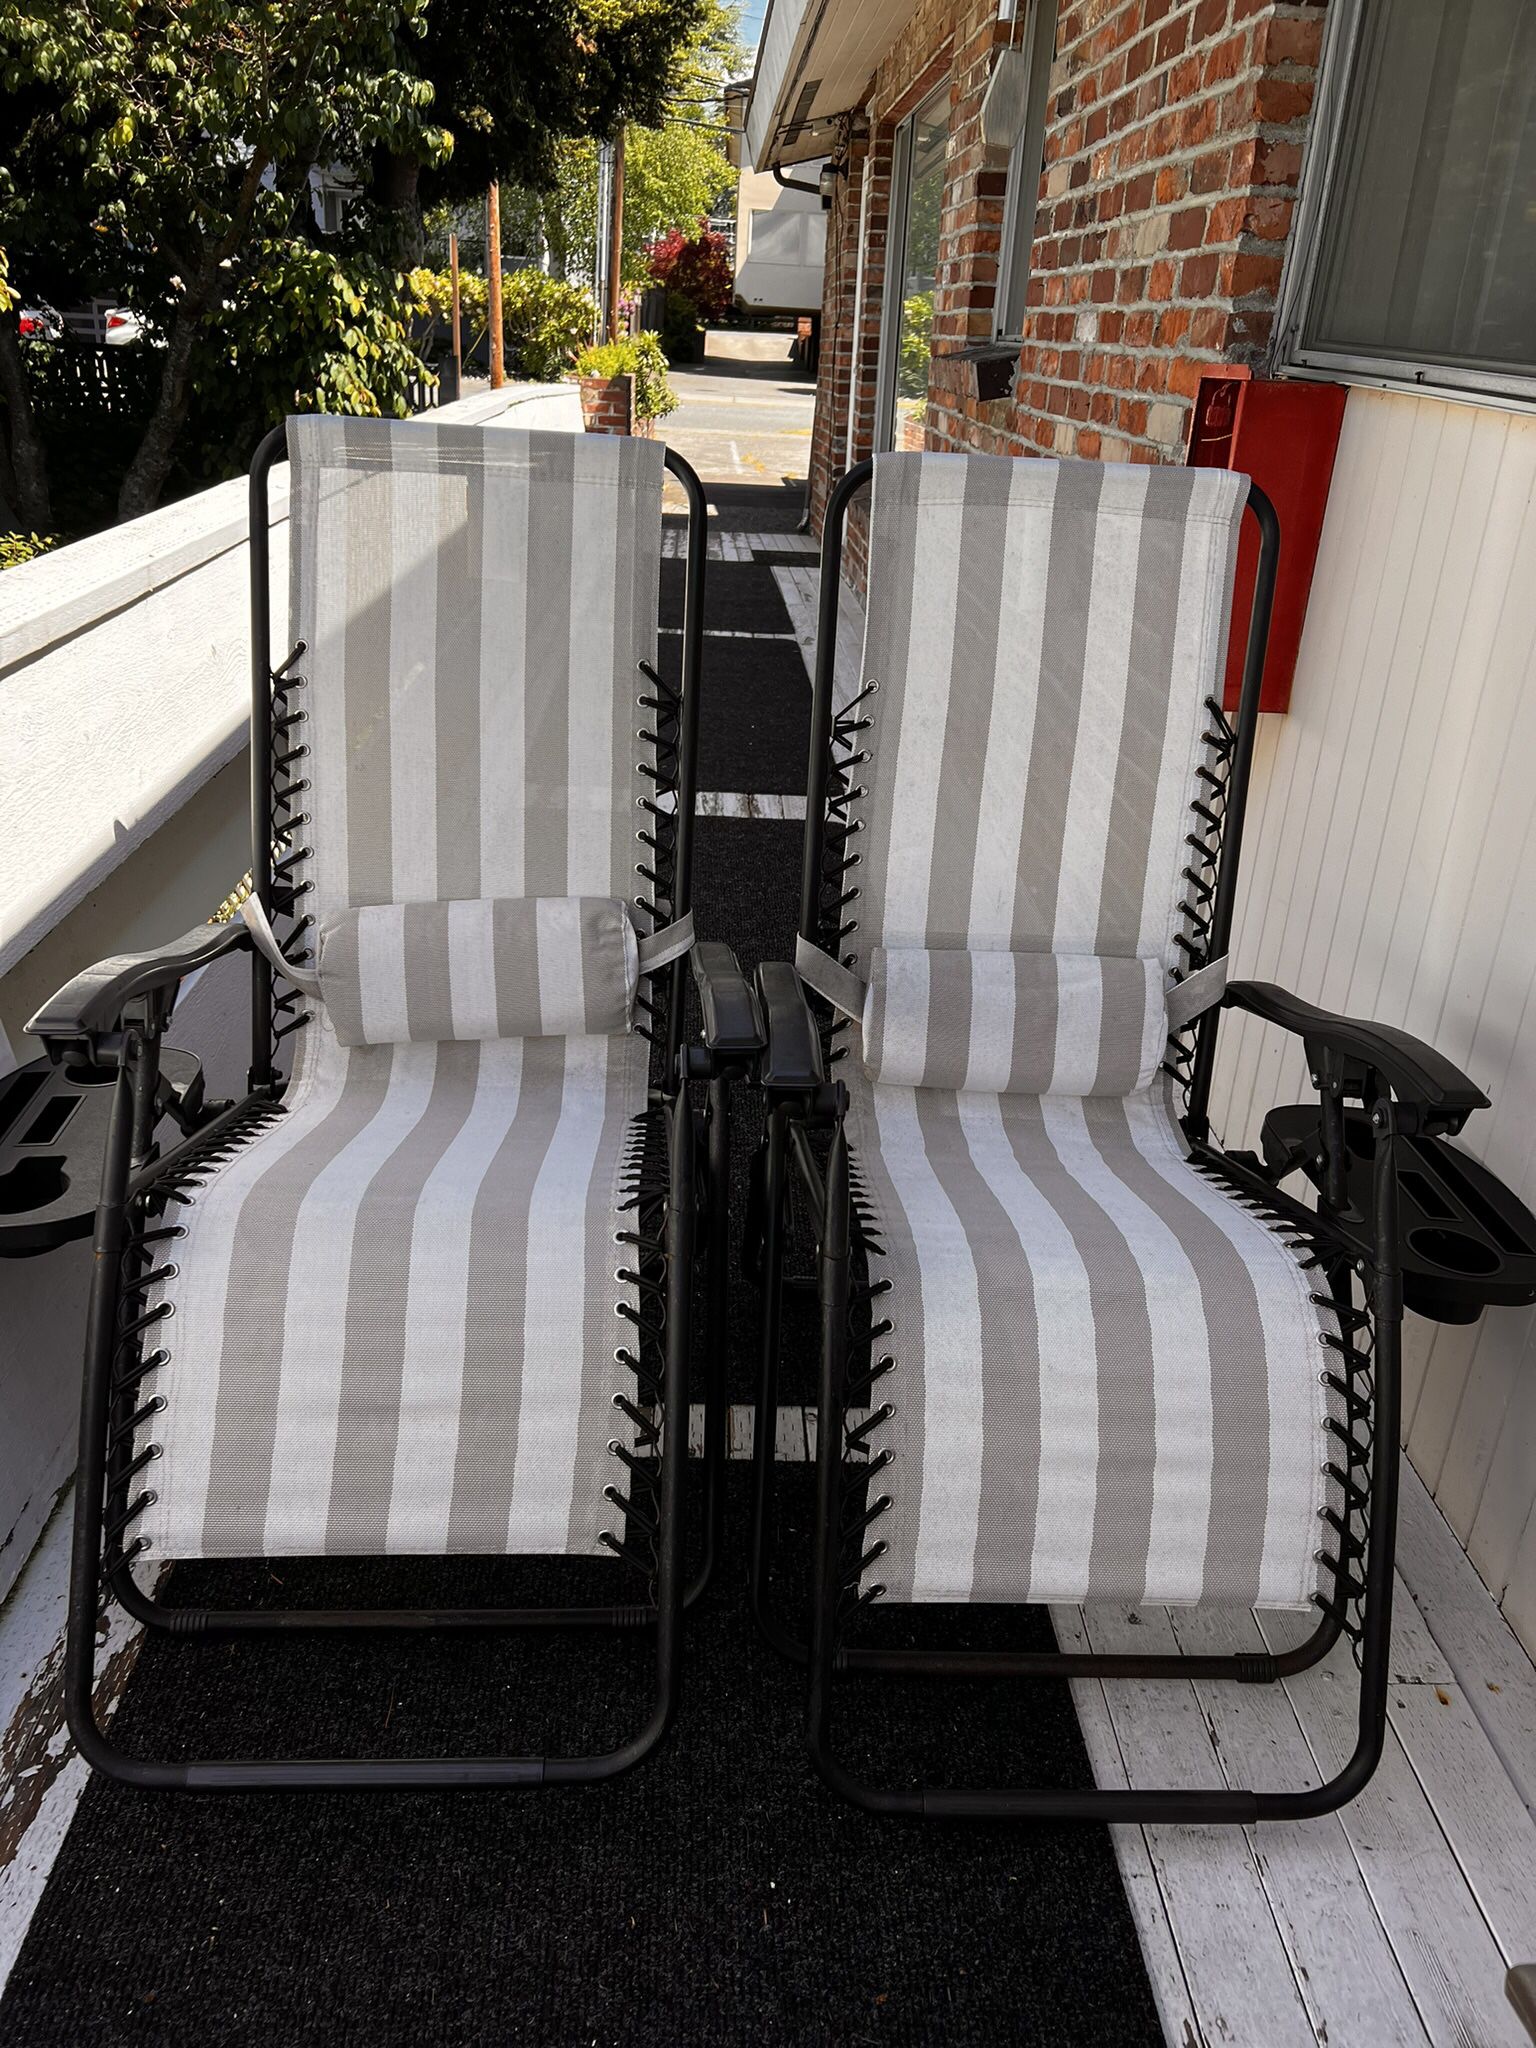 PENDING PICK UP.       2 Identical Adjustable, Gravity Lounge Chairs  With Side Trays/Cup Holders  $25 Each OR $40 For Both